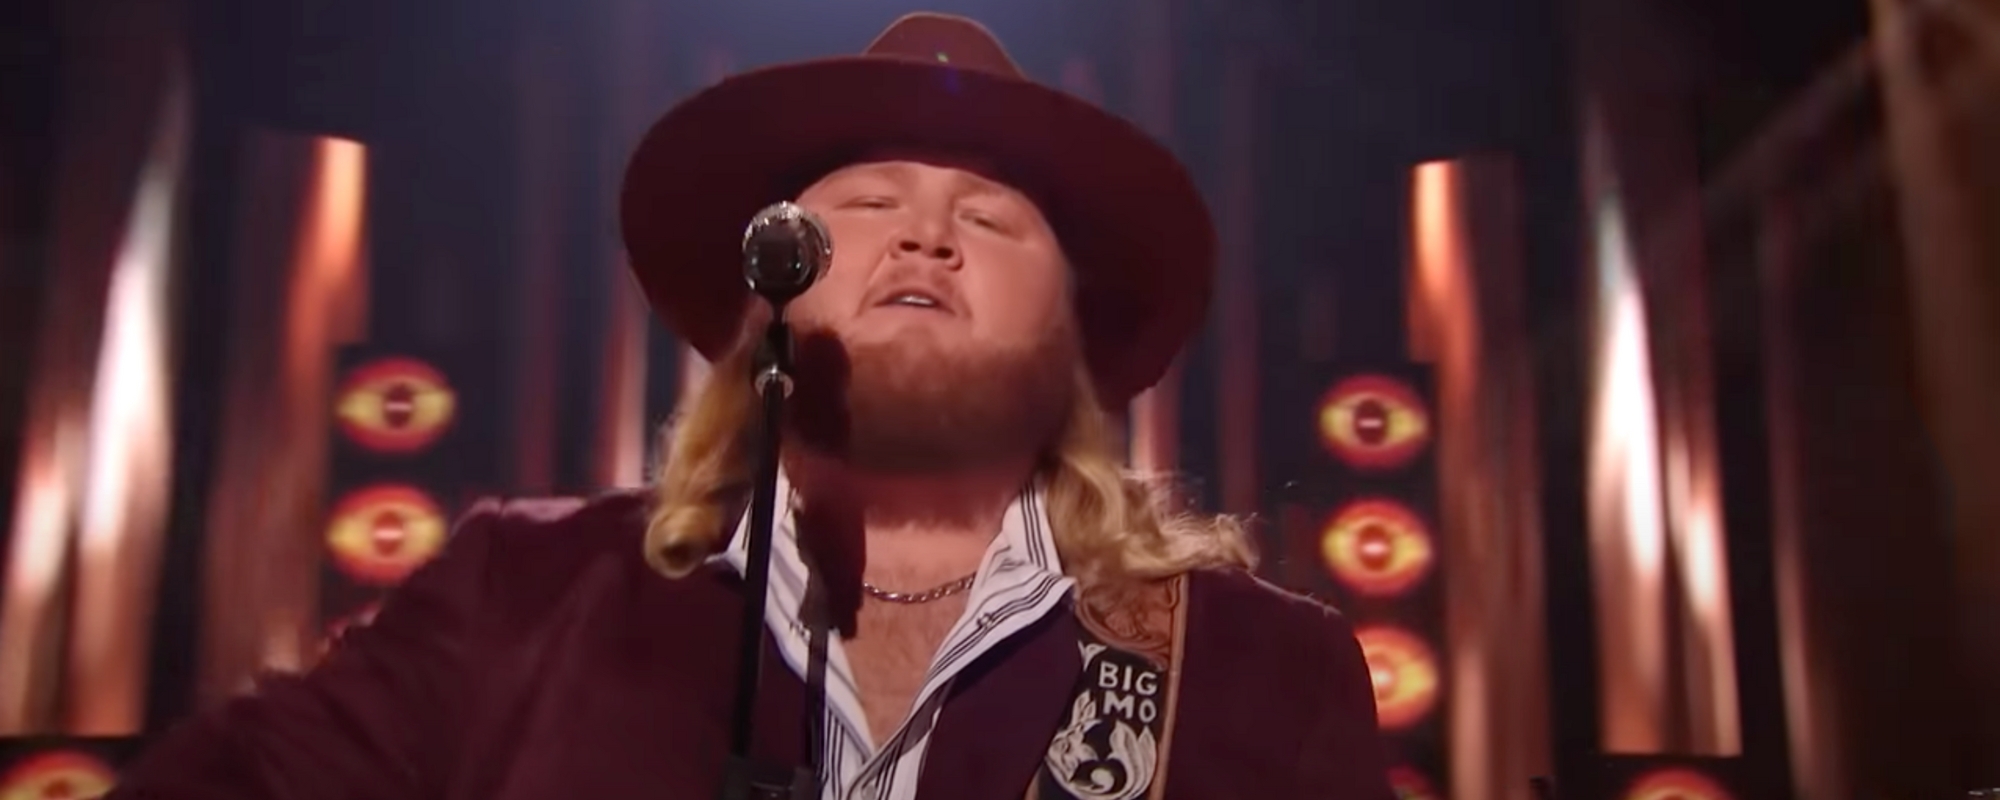 Will Moseley Delivers Breathtaking Cover of Chris Stapleton’s “Ballad of a Lonesome Cowboy” on ‘American Idol’